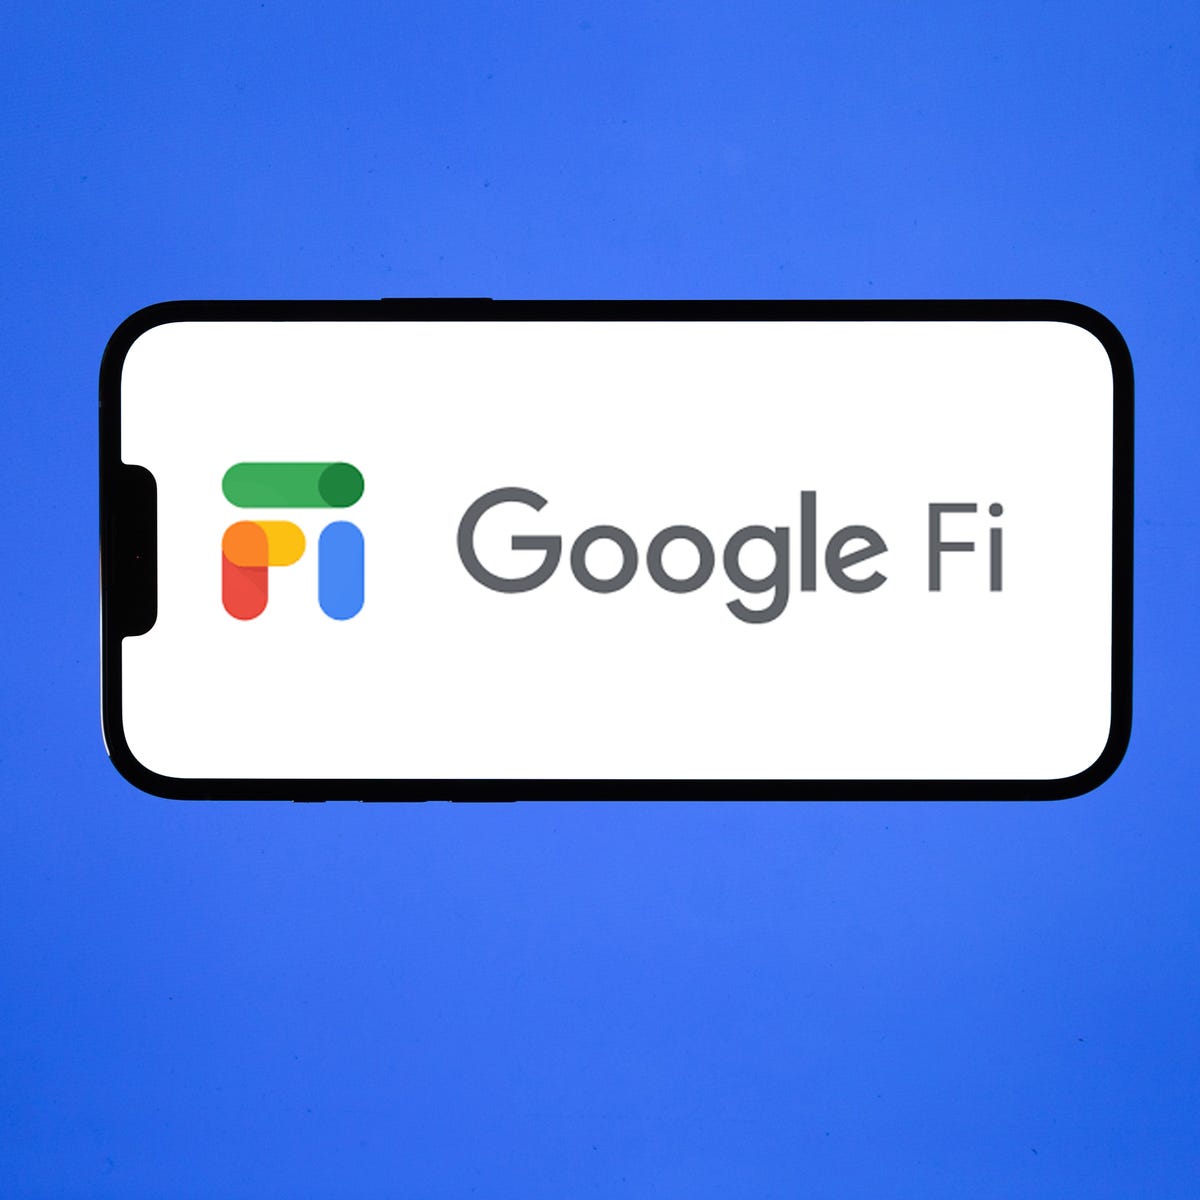 Does Google Fi only use T-Mobile?